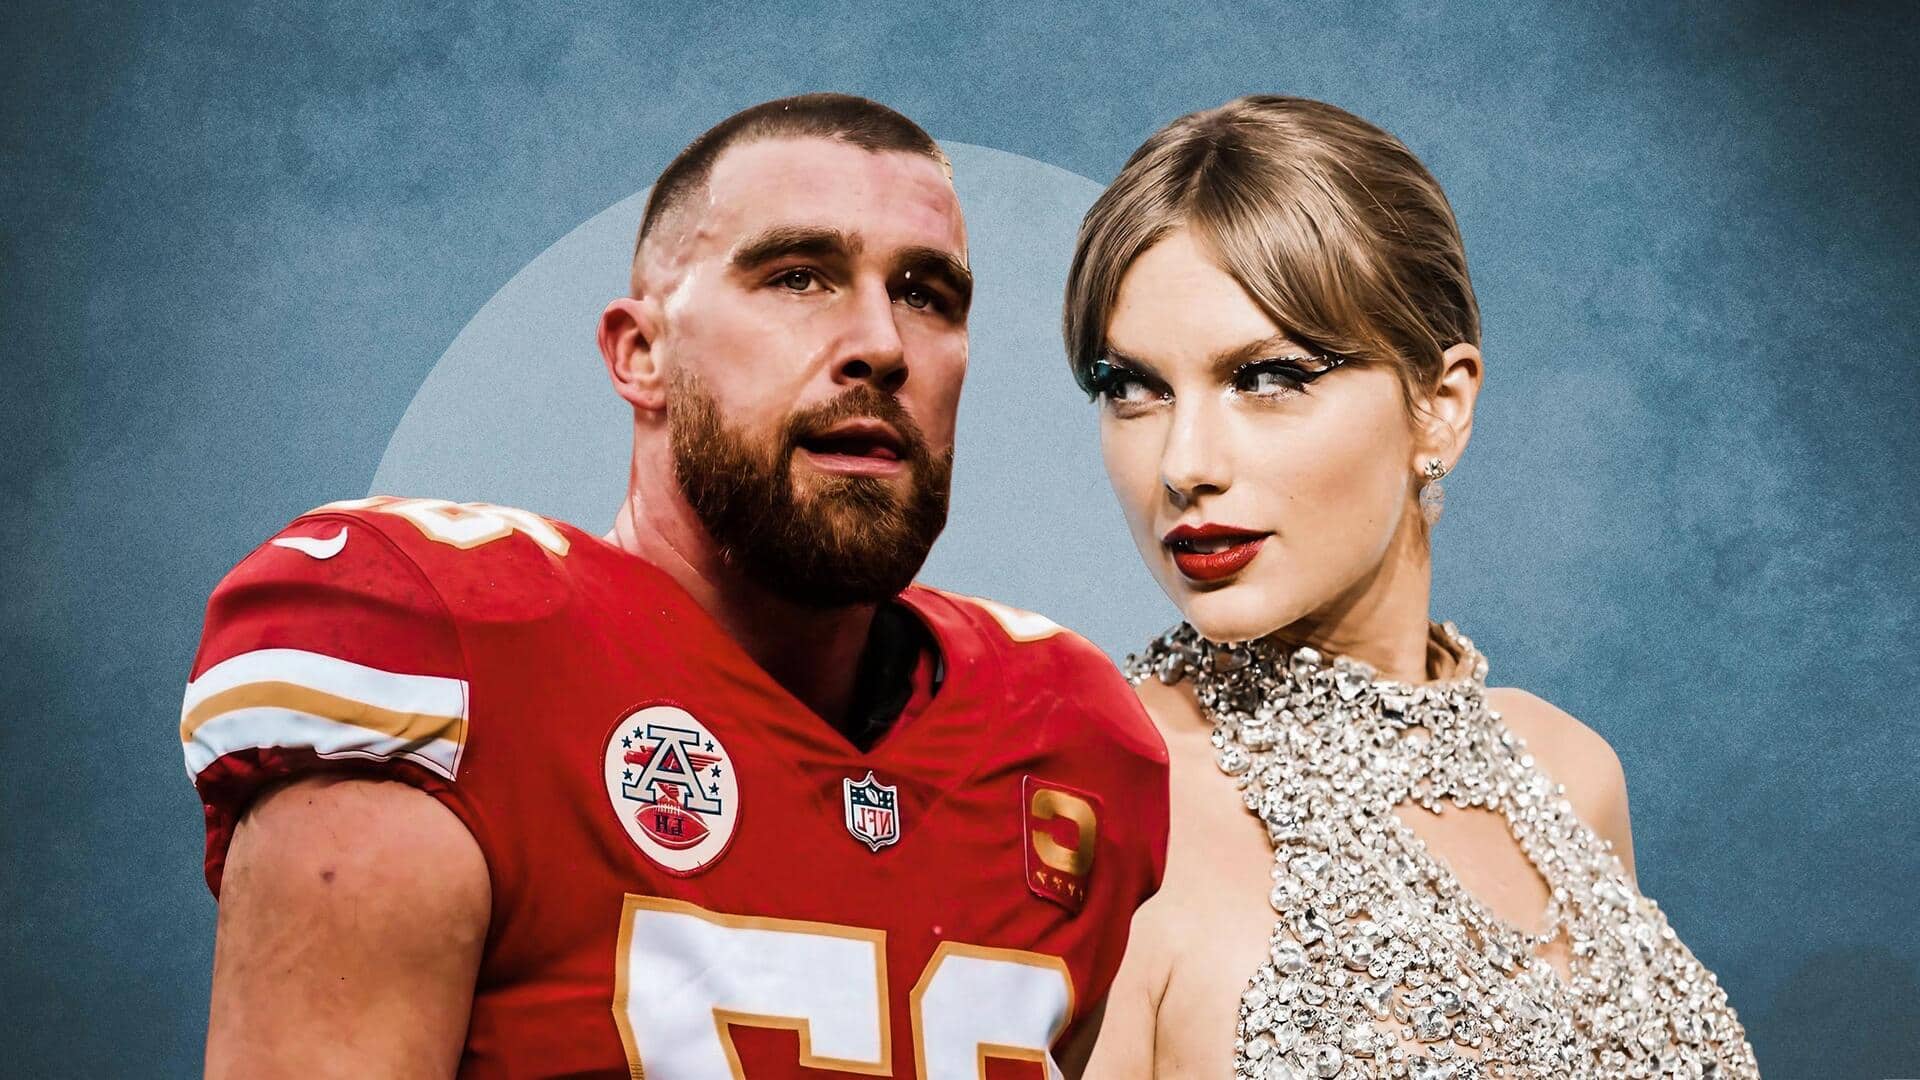 Taylor Swift linked with NFL player Travis Kelce—his life, career